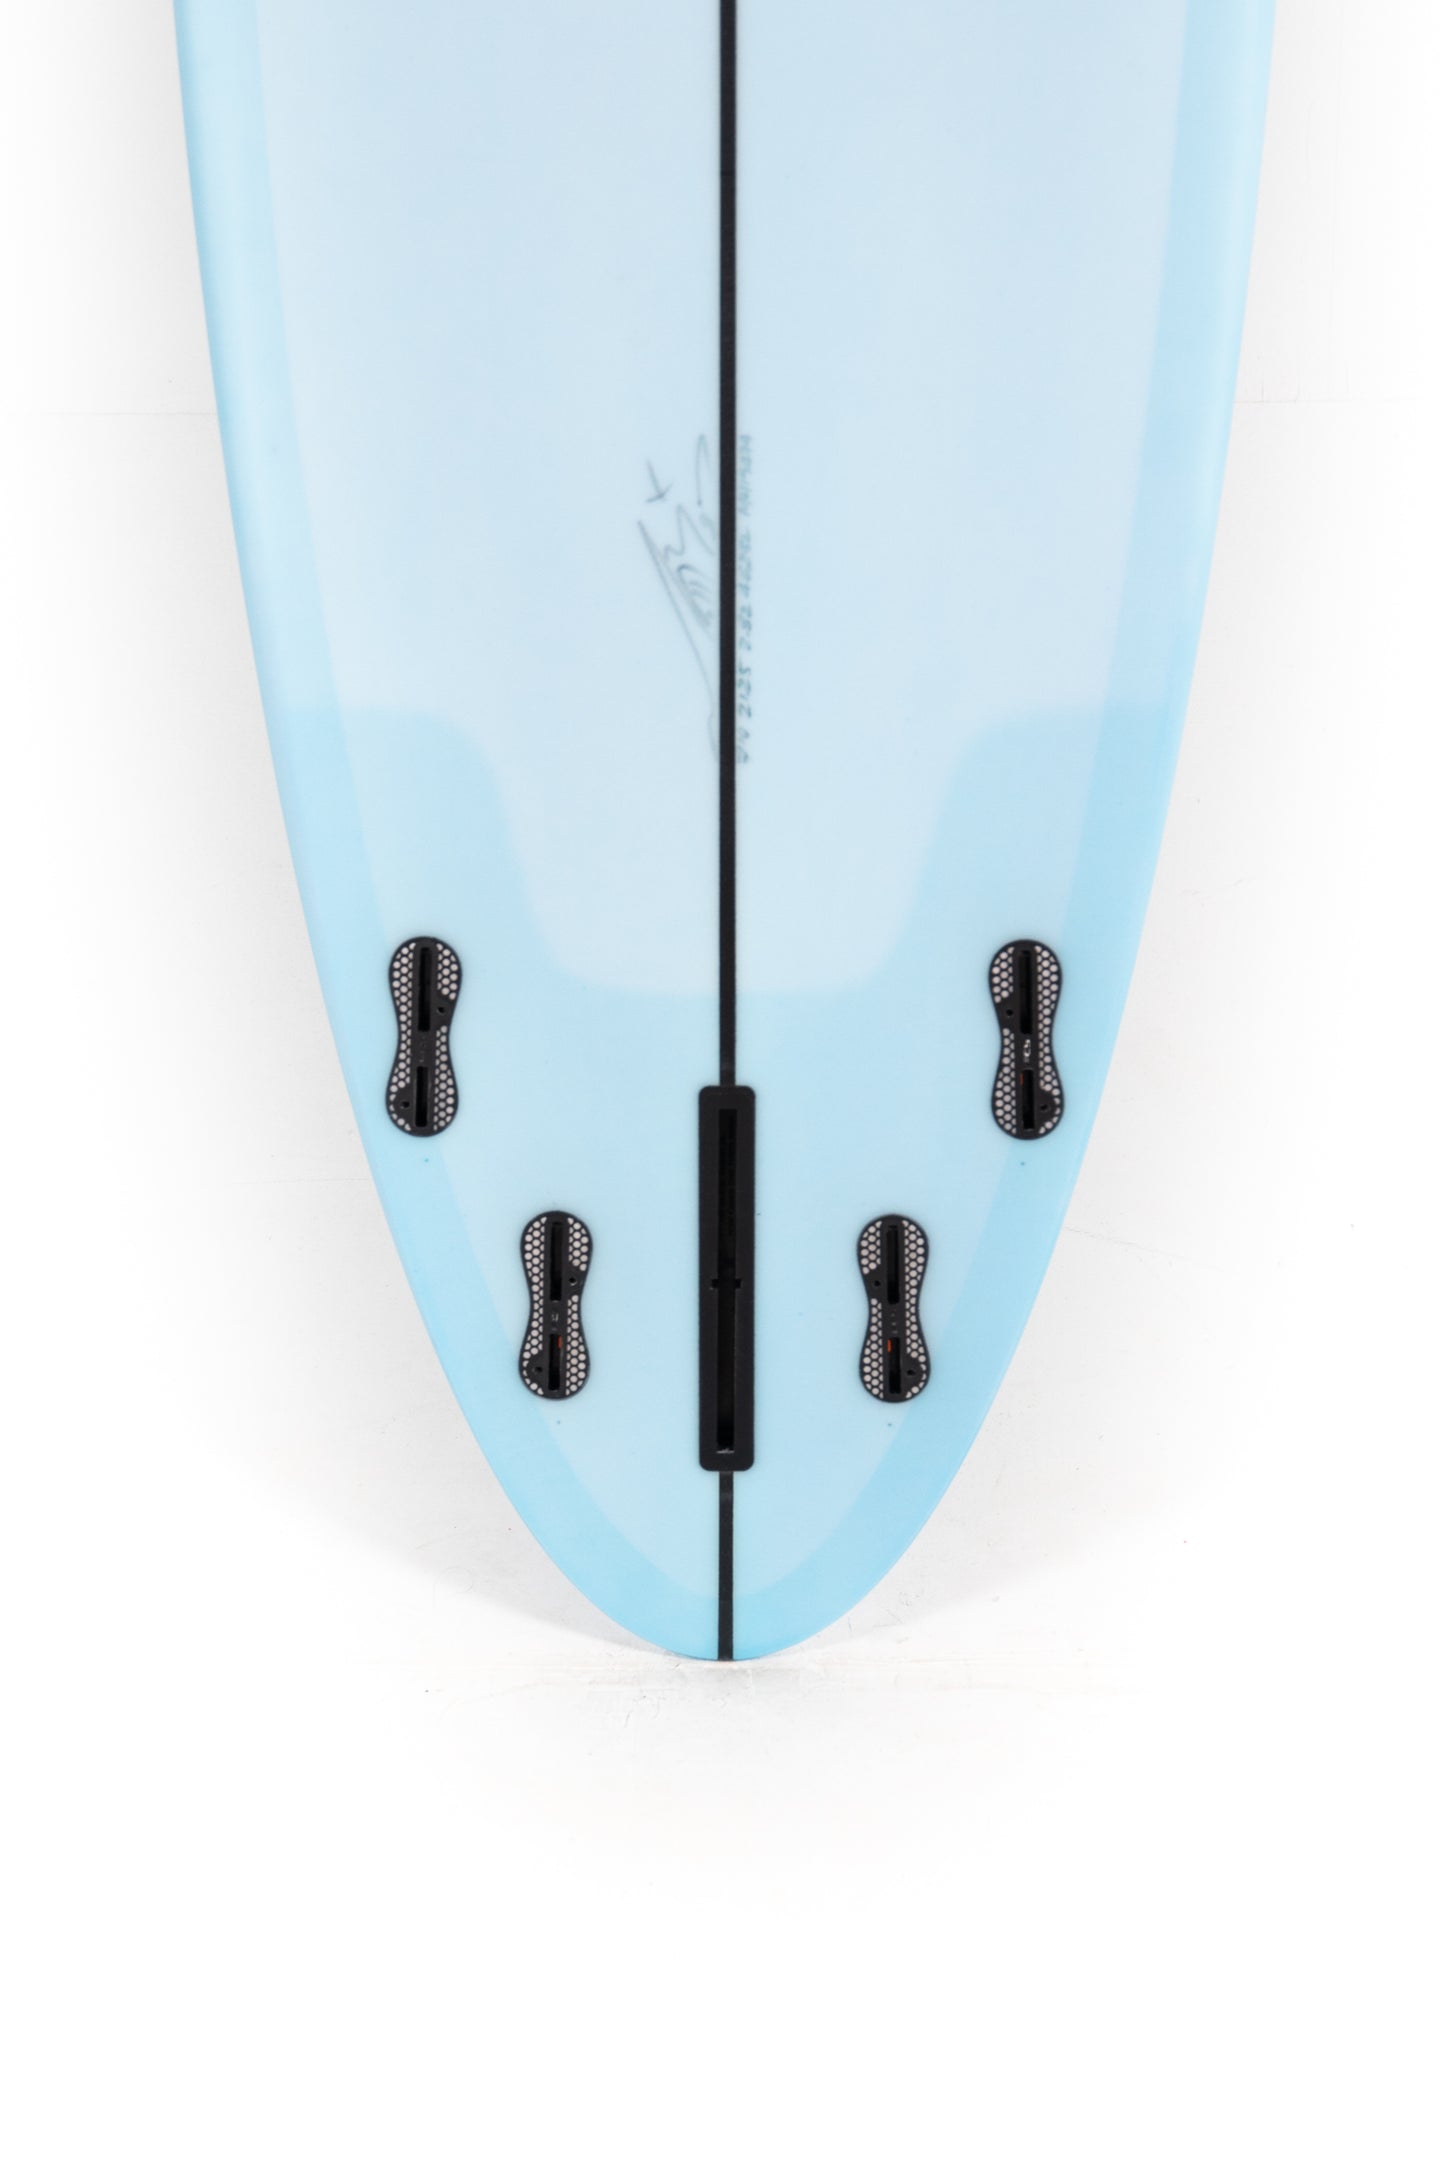 
                  
                    Lost Surfboards - SMOOTH OPERATOR by Matt Biolos - 7’0” x 21,25 x 2,82 - 46,25L - MH19474
                  
                